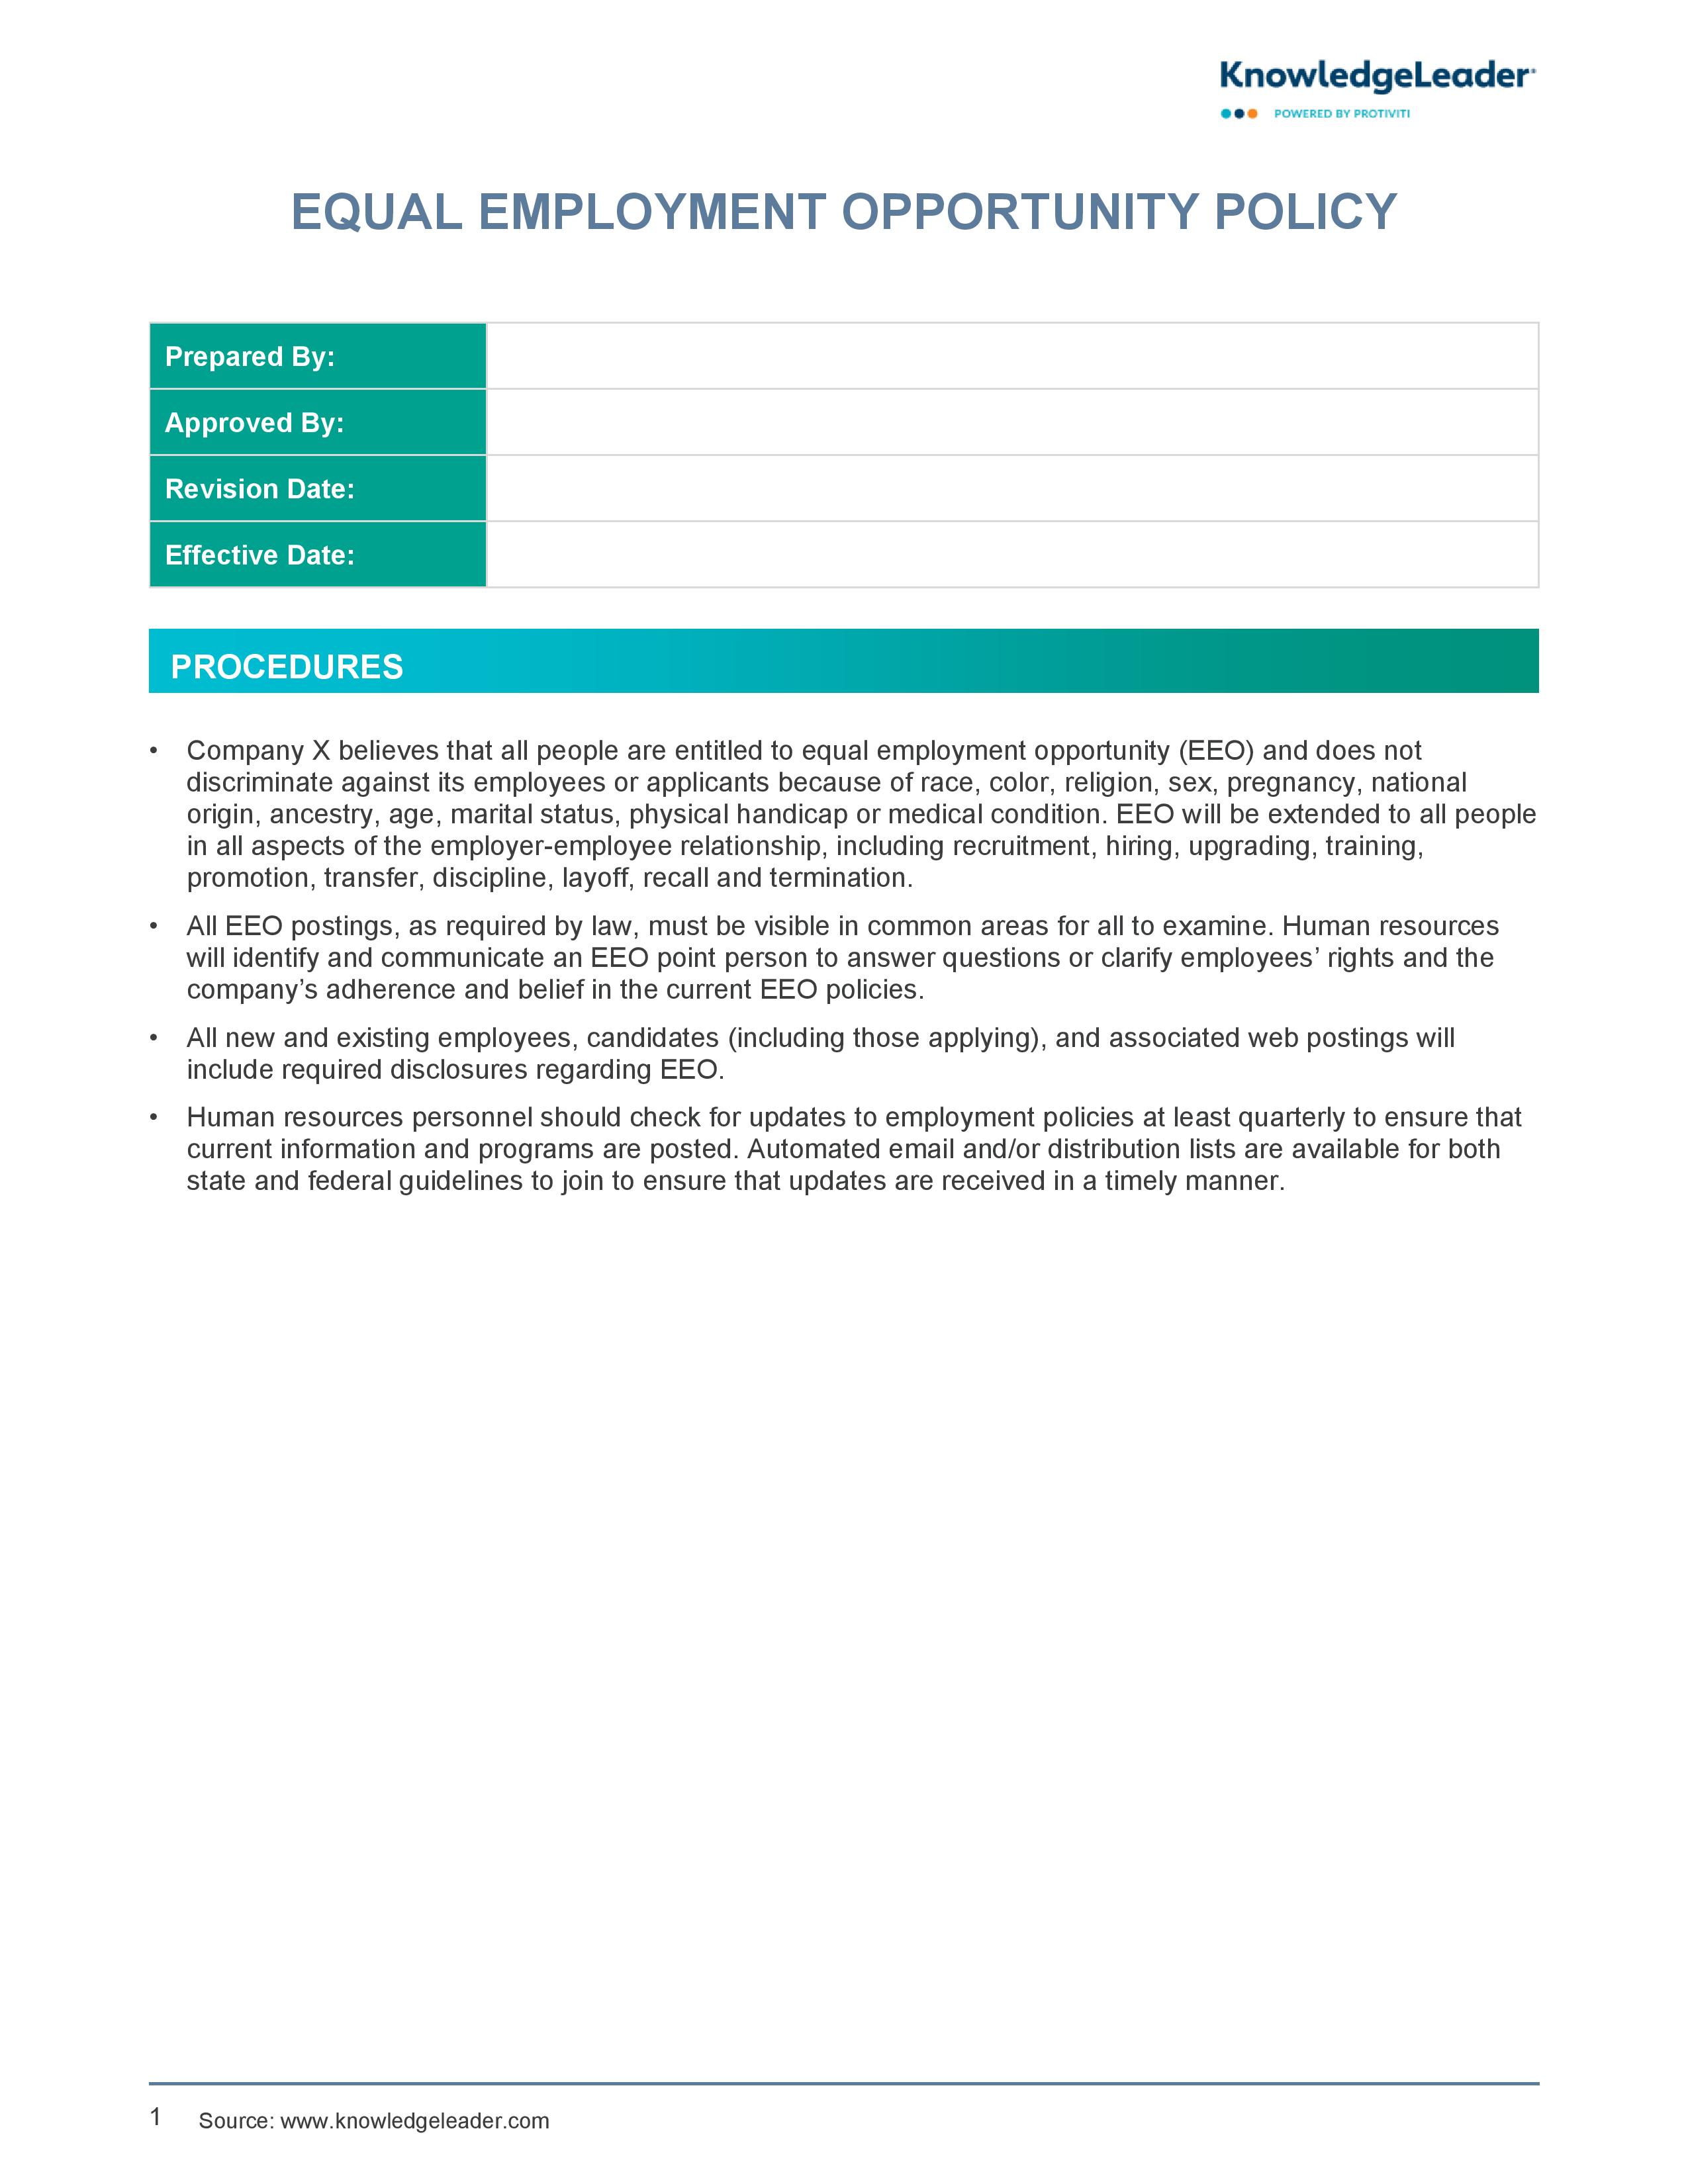 Screenshot of the first page of Equal Employment Opportunity Policy